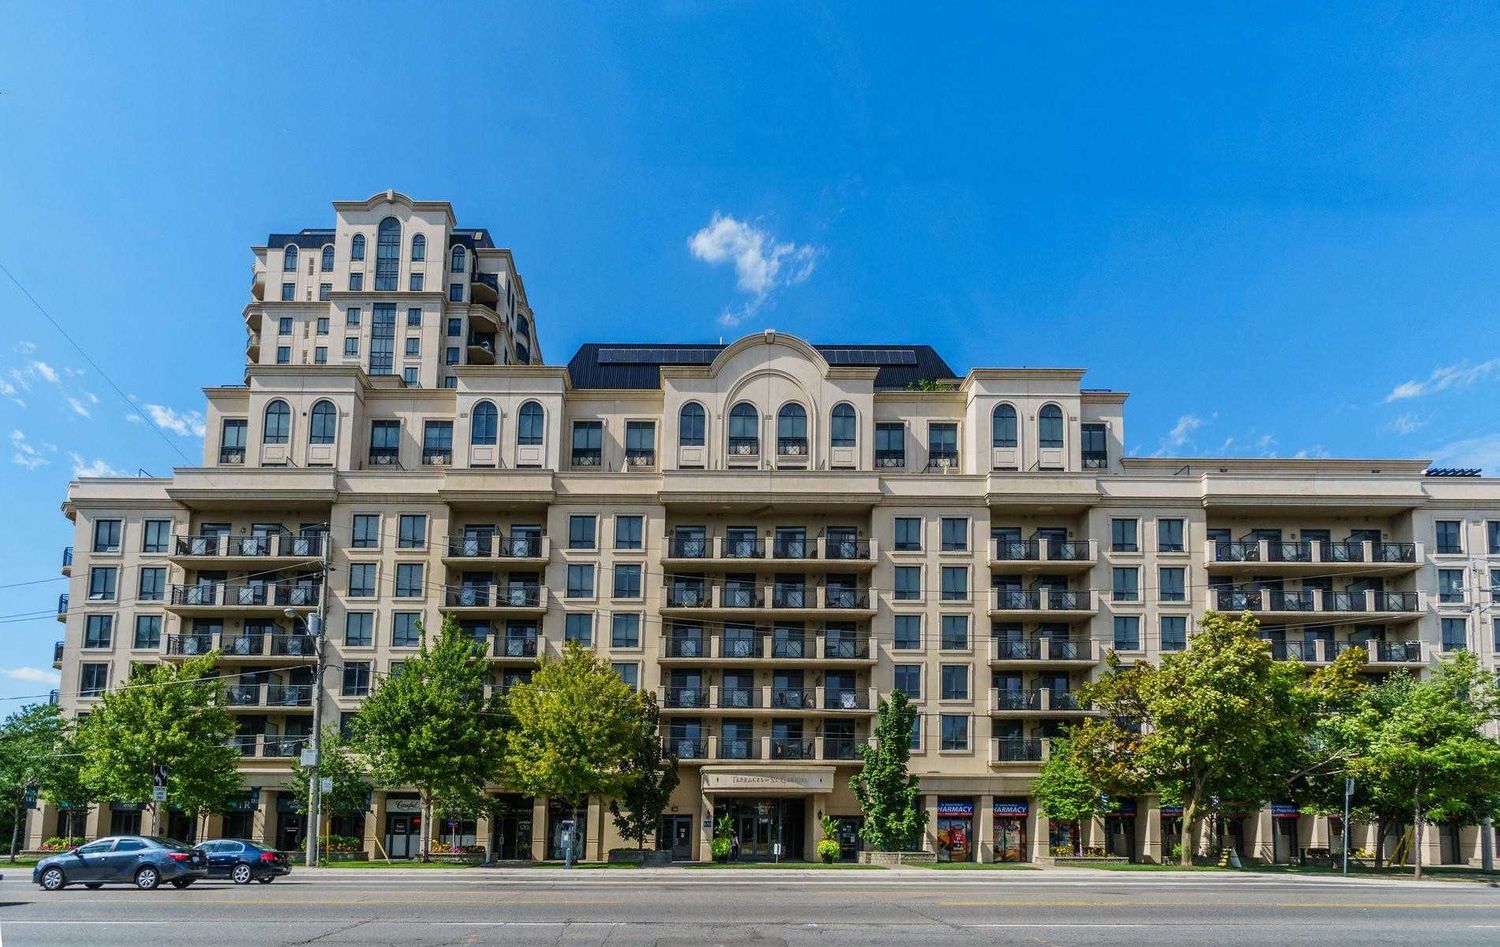 650 Sheppard Avenue E. St Gabriel Terraces Condos is located in  North York, Toronto - image #1 of 2